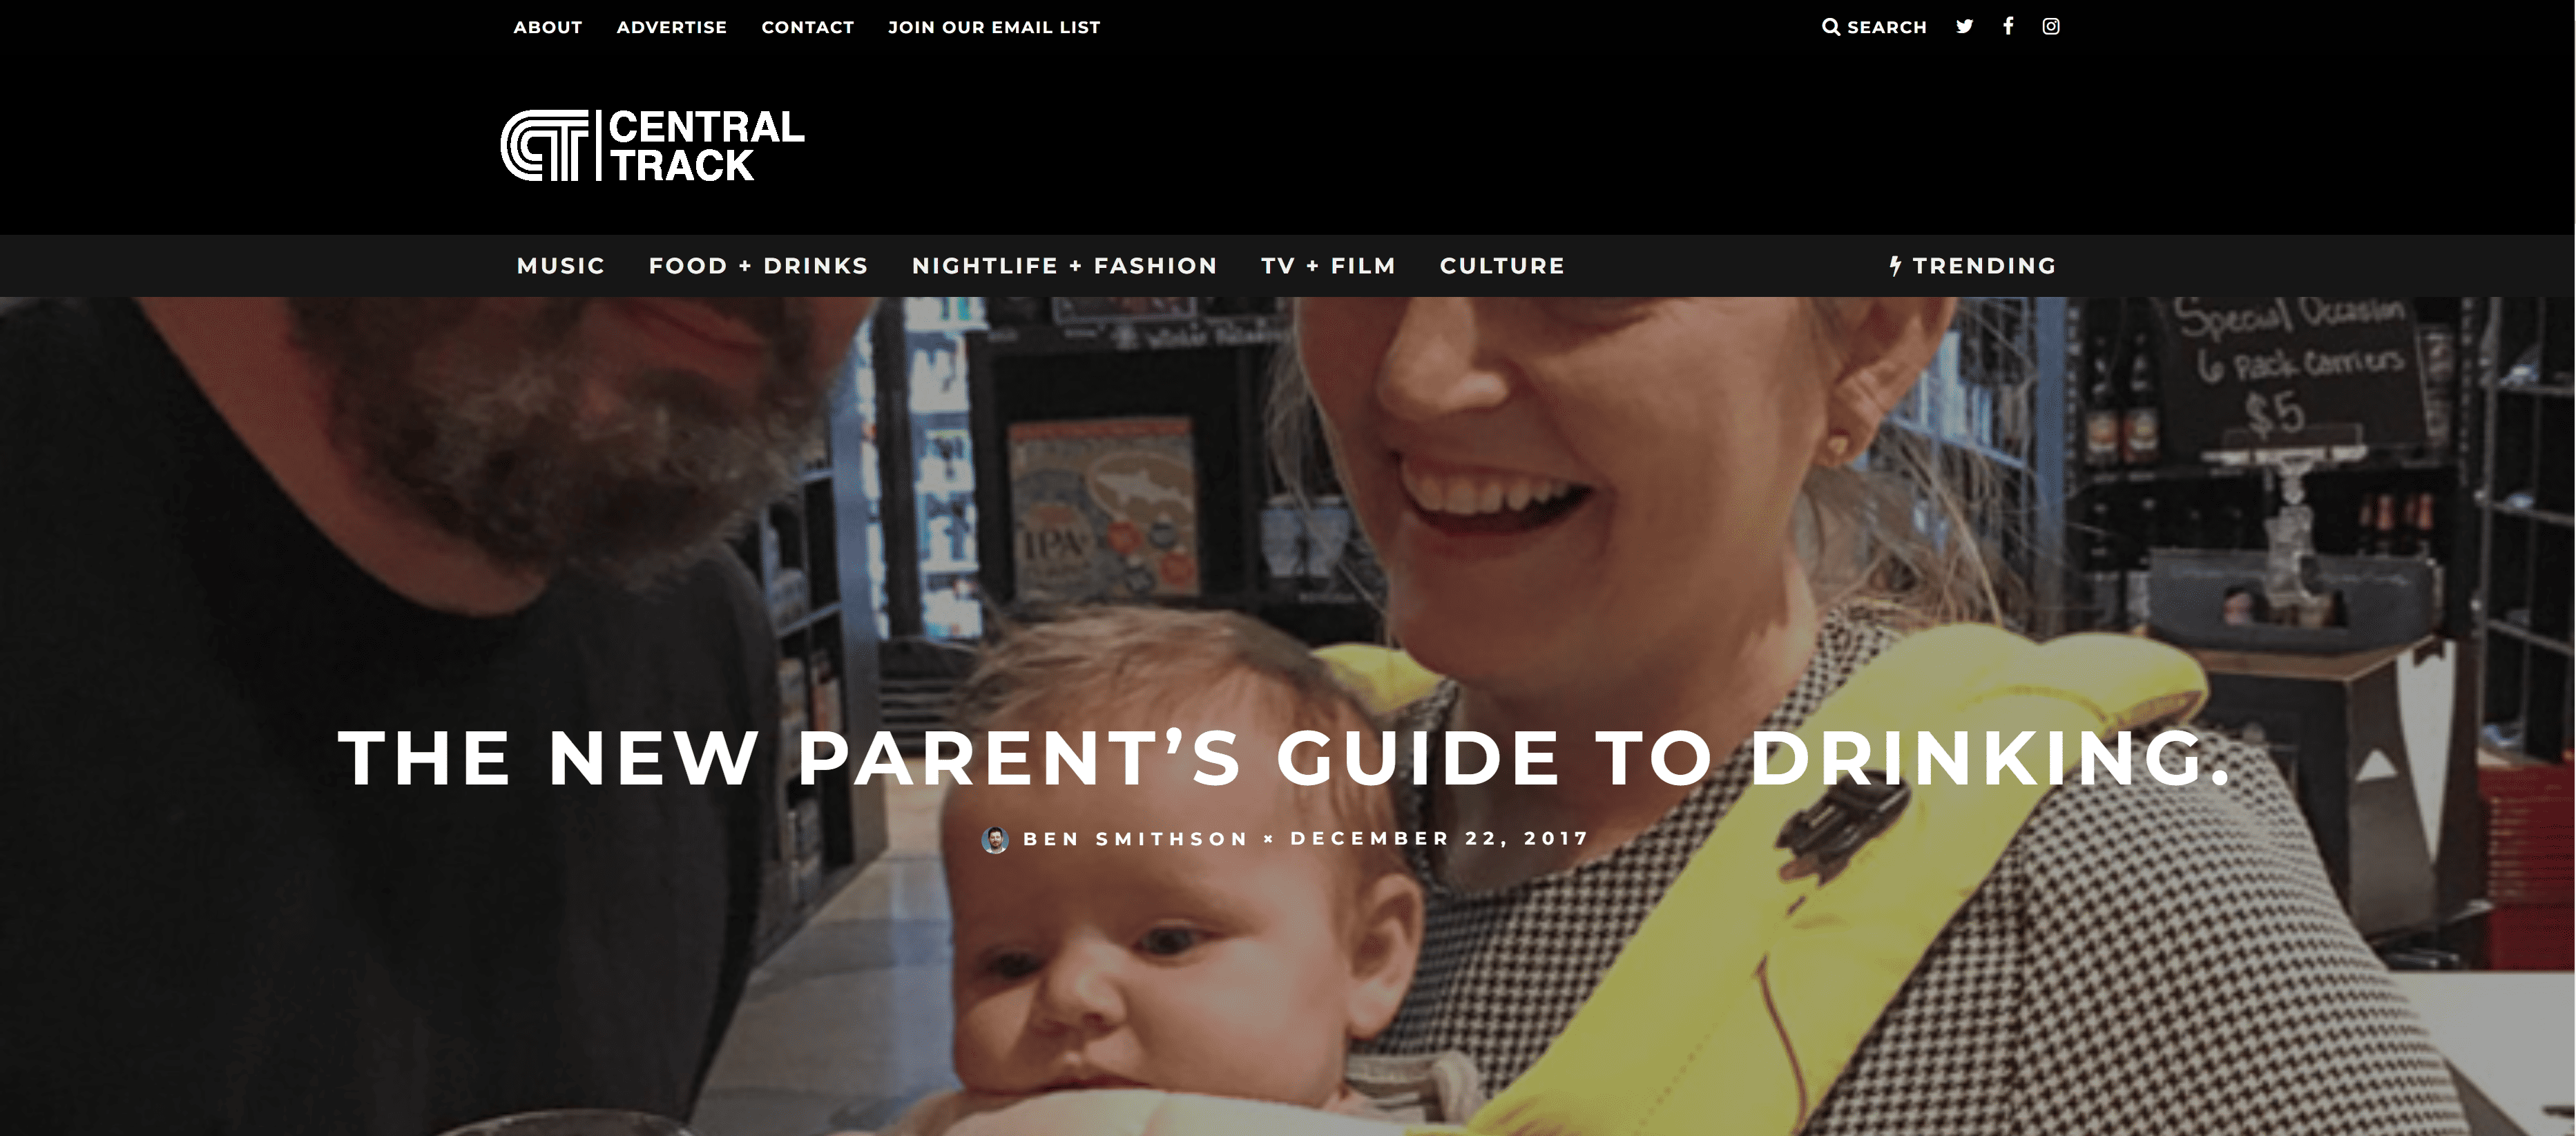 The New Parent's Guide to Drinking in Central Track